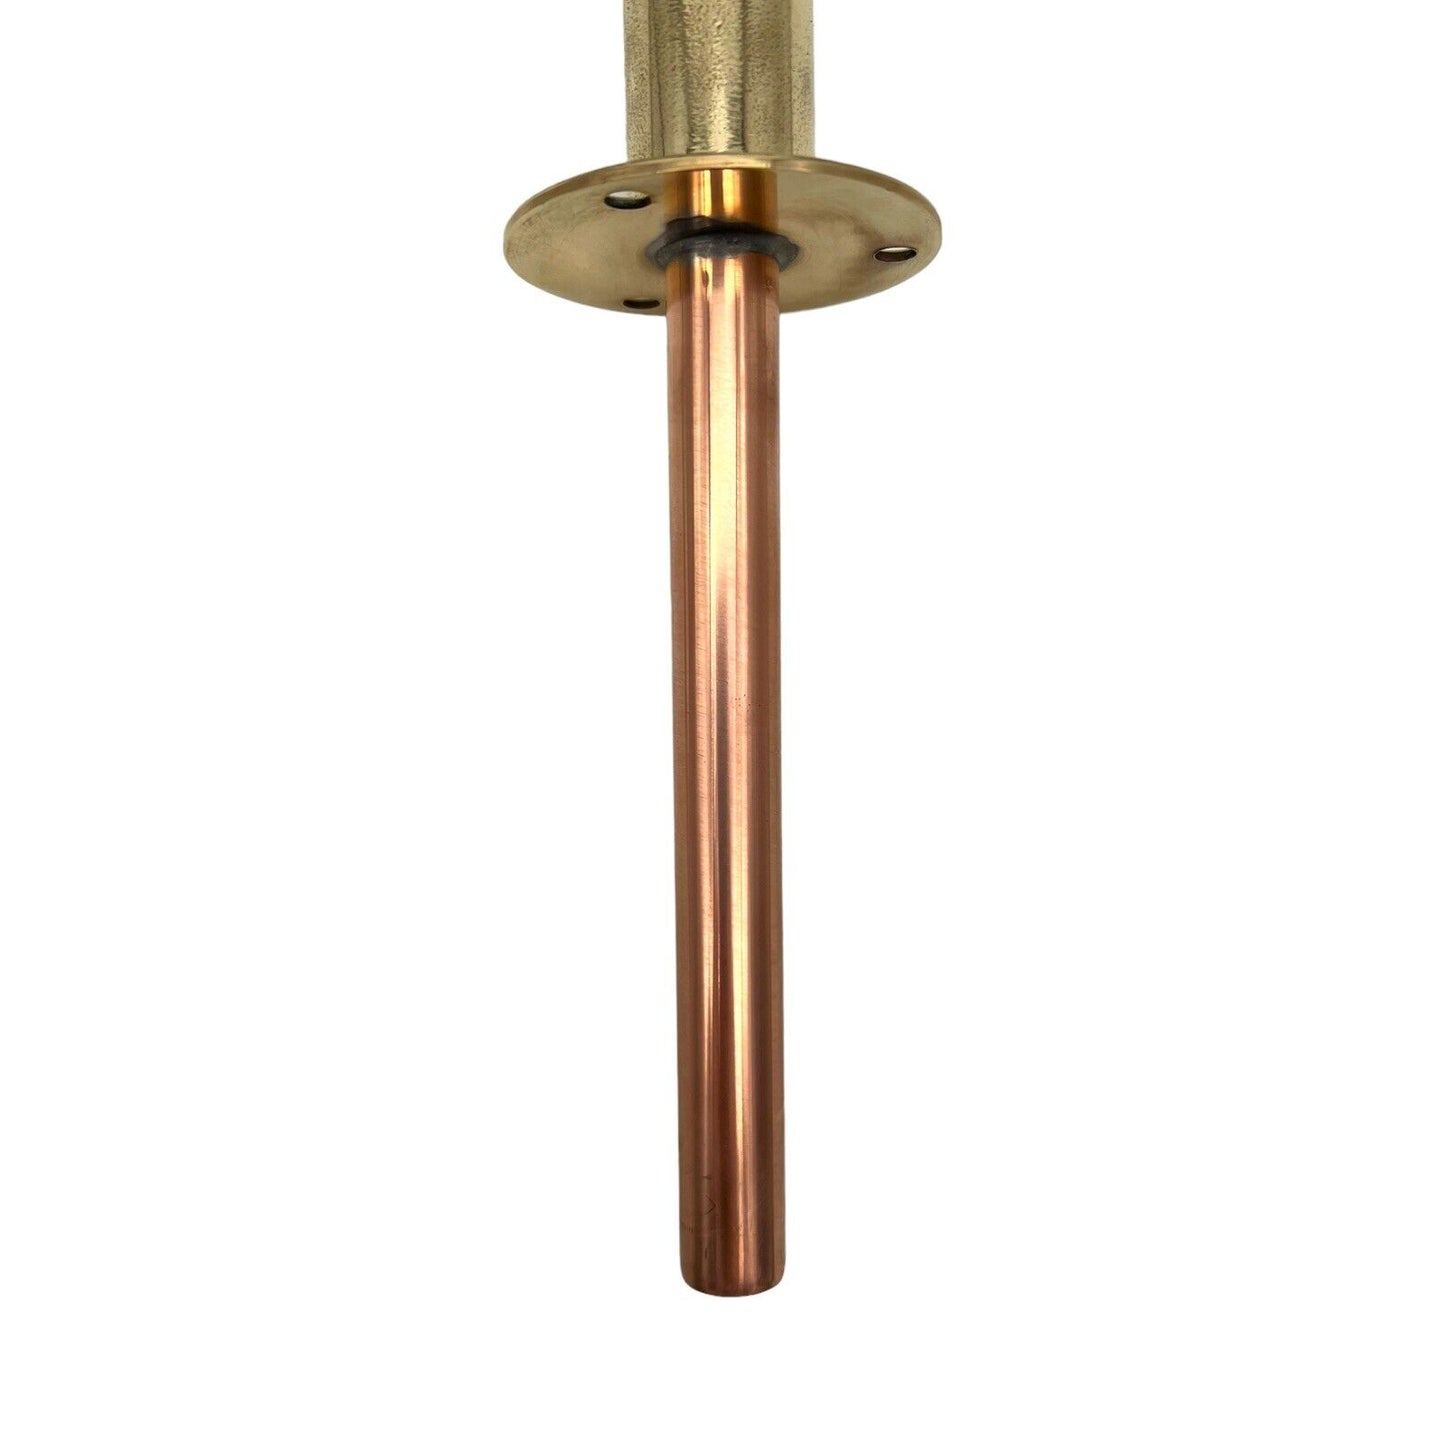 Copper and brass handmade bathroom or kitchen tap